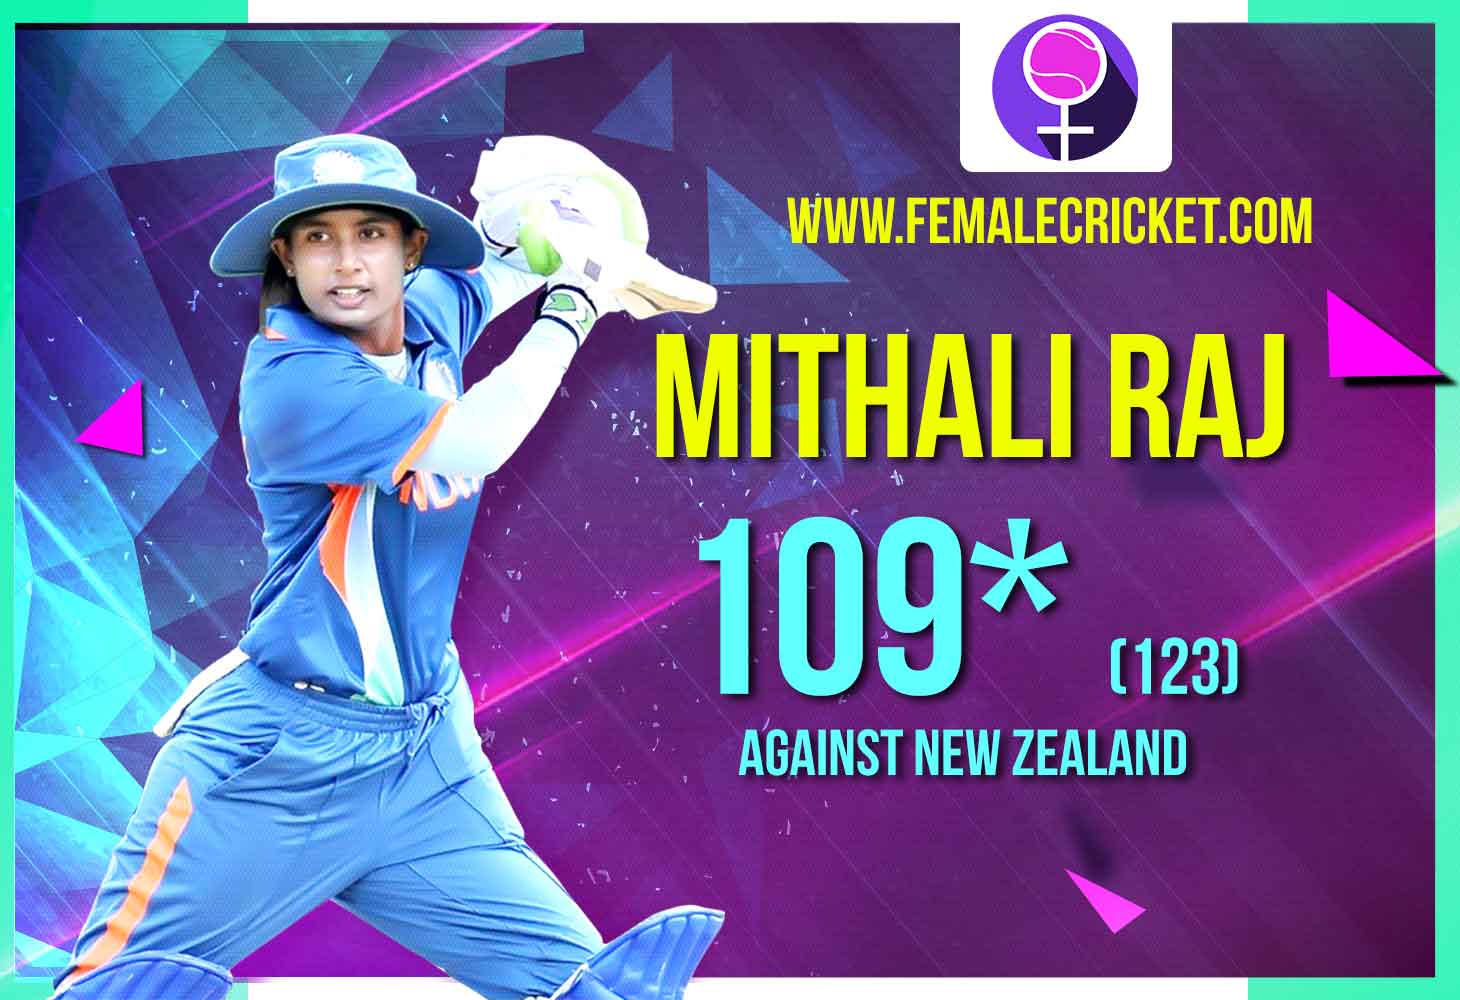 Mithali Raj scores 109 against New Zealand women in World Cup 2017